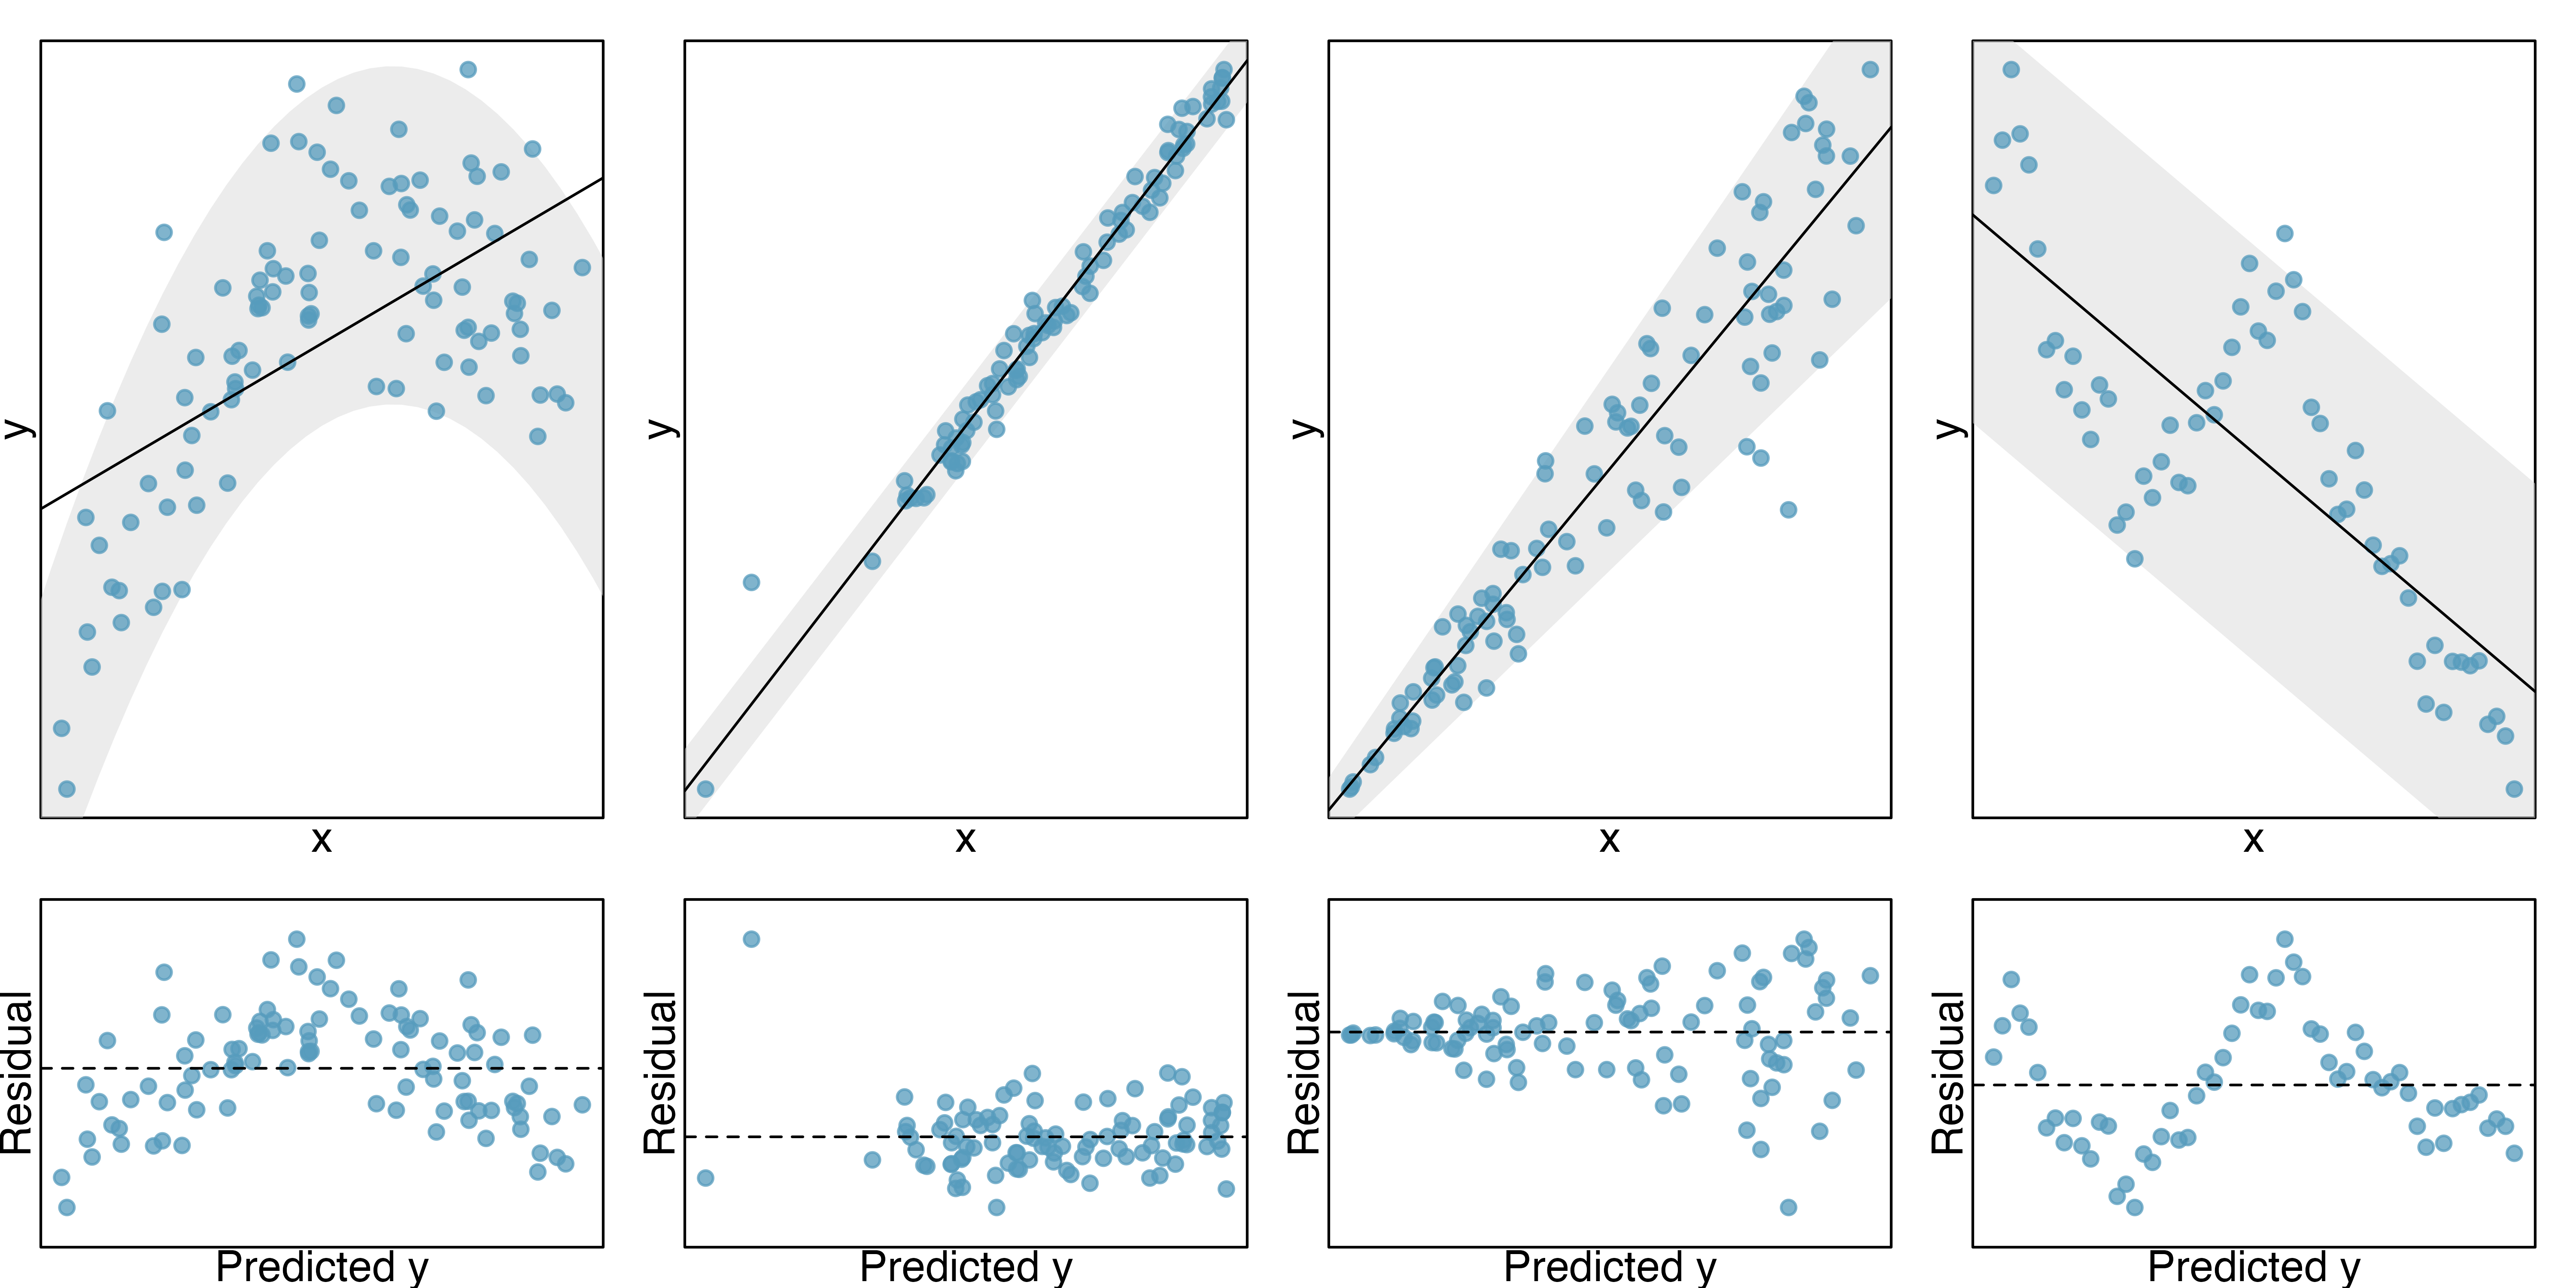 A grid of 2 by 4 scatterplots with fabricated data.  The top row of plots contains original x-y data plots with a least squares regression line. The bottom row of plots is a series of residual plot with predicted value on the x-axis and residual on the y-axis.  The first column of plots gives an example of points that have a quadratic relationship instead of a linear relationship. The second column of plots gives an example where a single outlying point does not fit the linear model.  The third column of points gives an example where the points have increasing variability as the value of x increases. The last column of points gives an example where the points are correlated with one another, possibly as part of a time series.